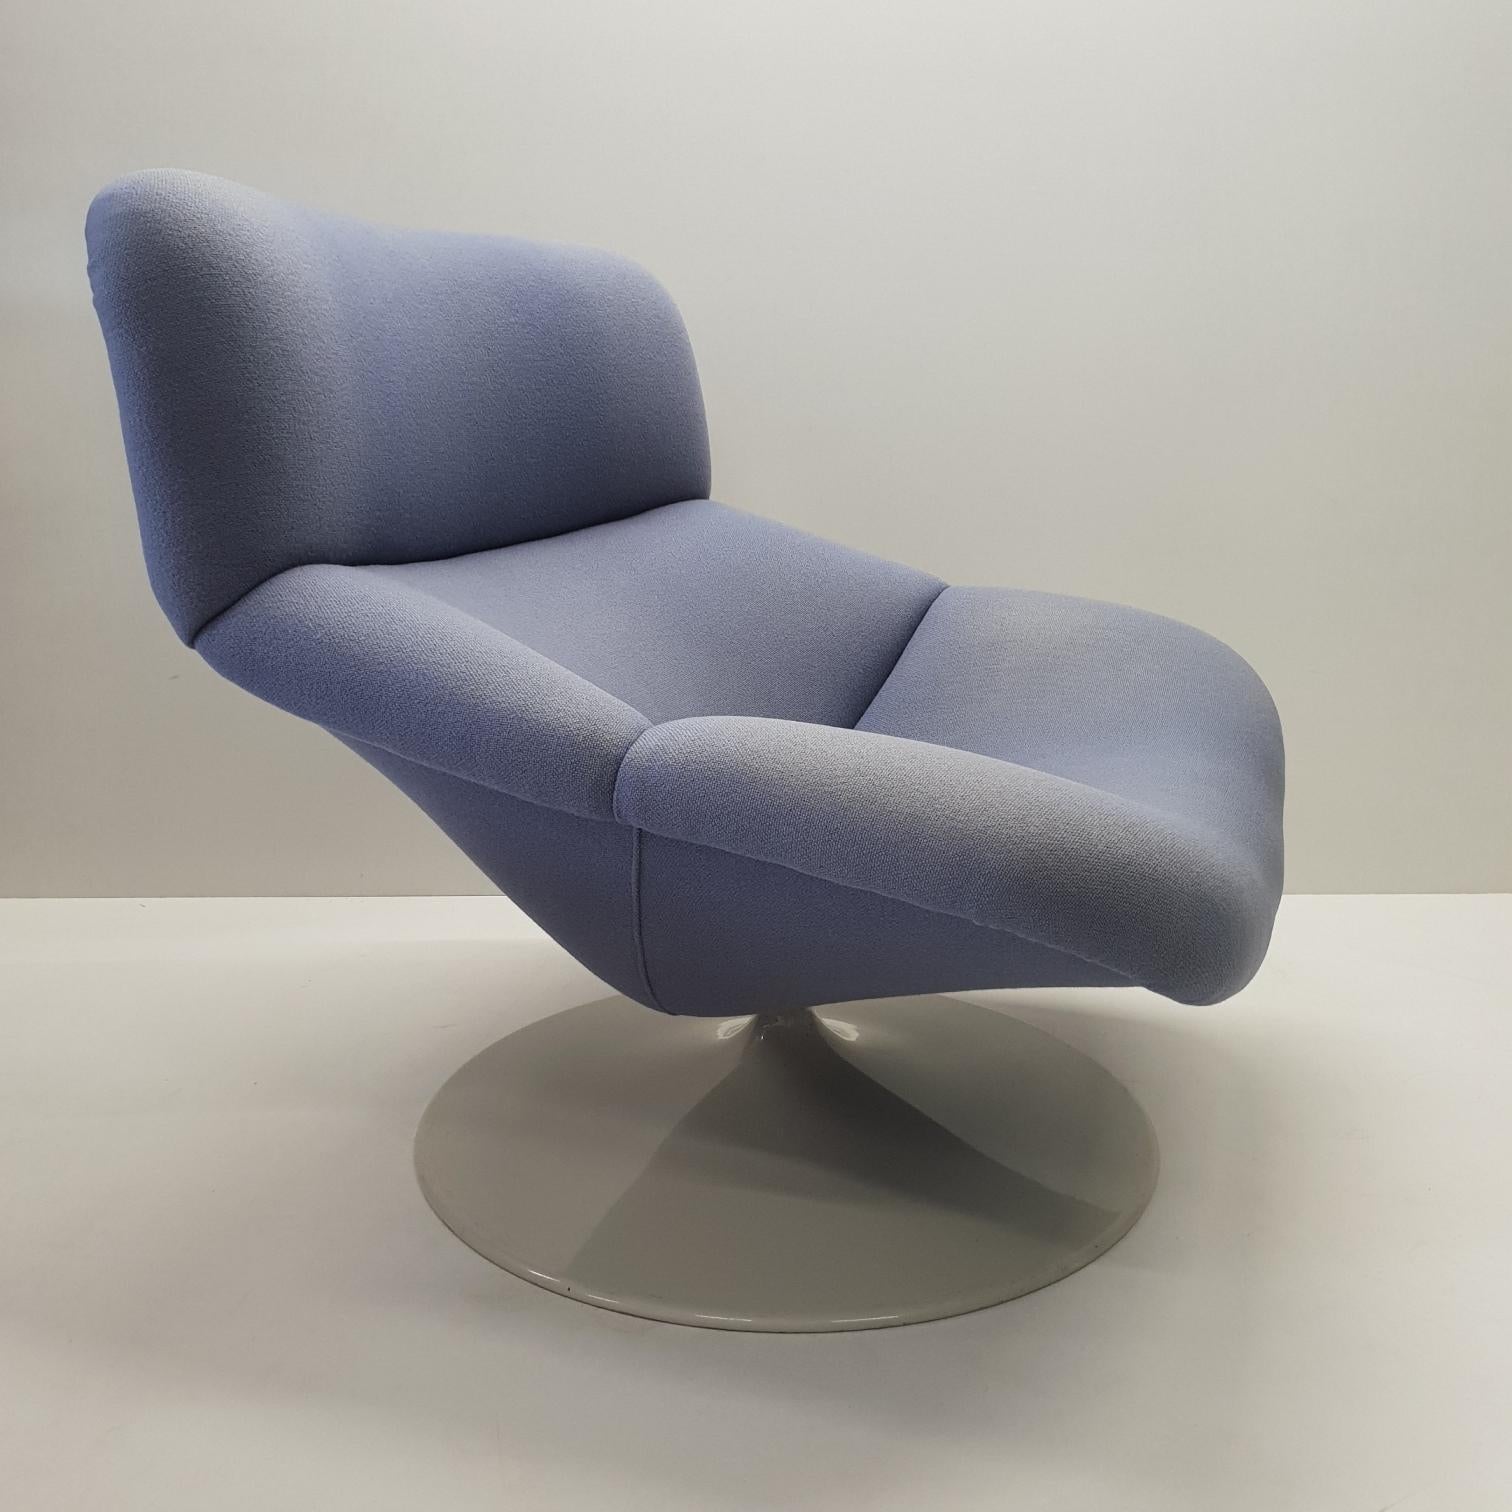 20th Century Swivel Lounge Chair F518 by Geoffrey Harcourt for Artifort ‘Marked’, 1979